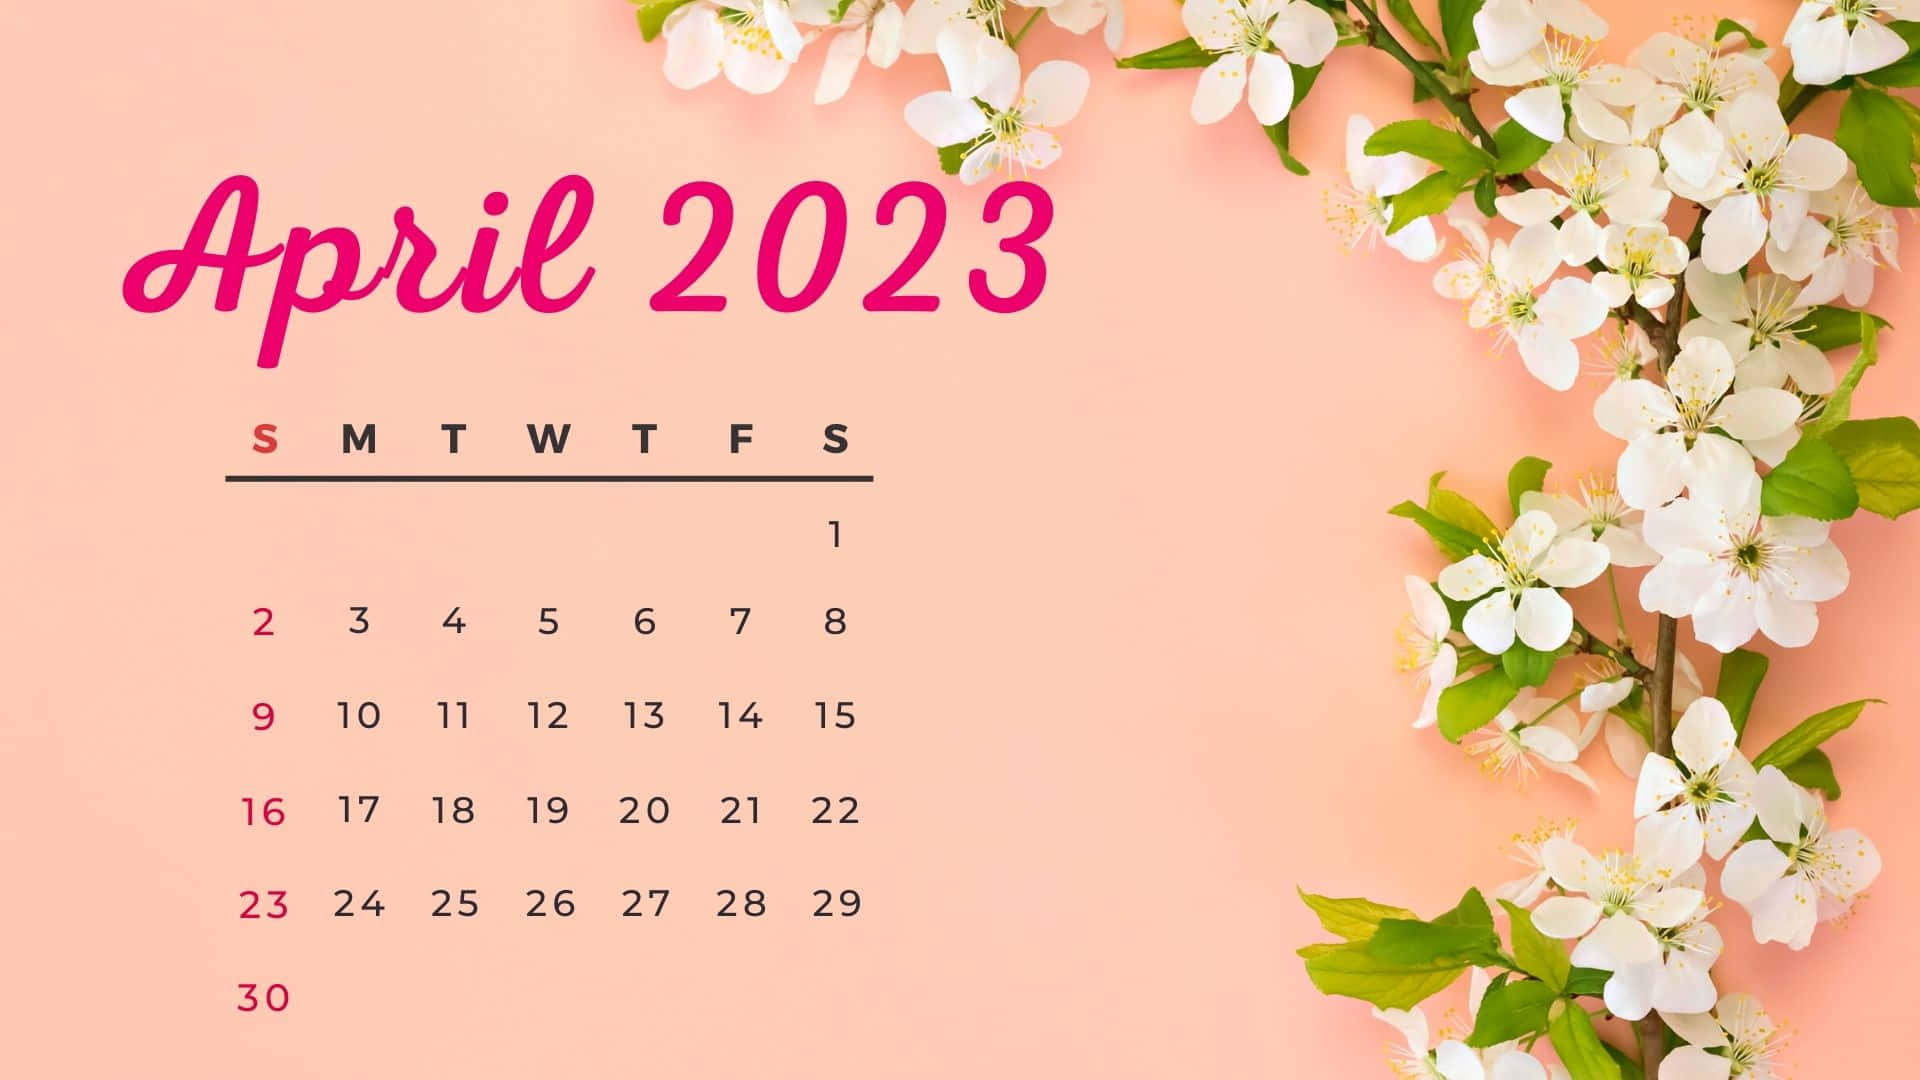 April 2020 Calendar With Flowers And Flowers Wallpaper